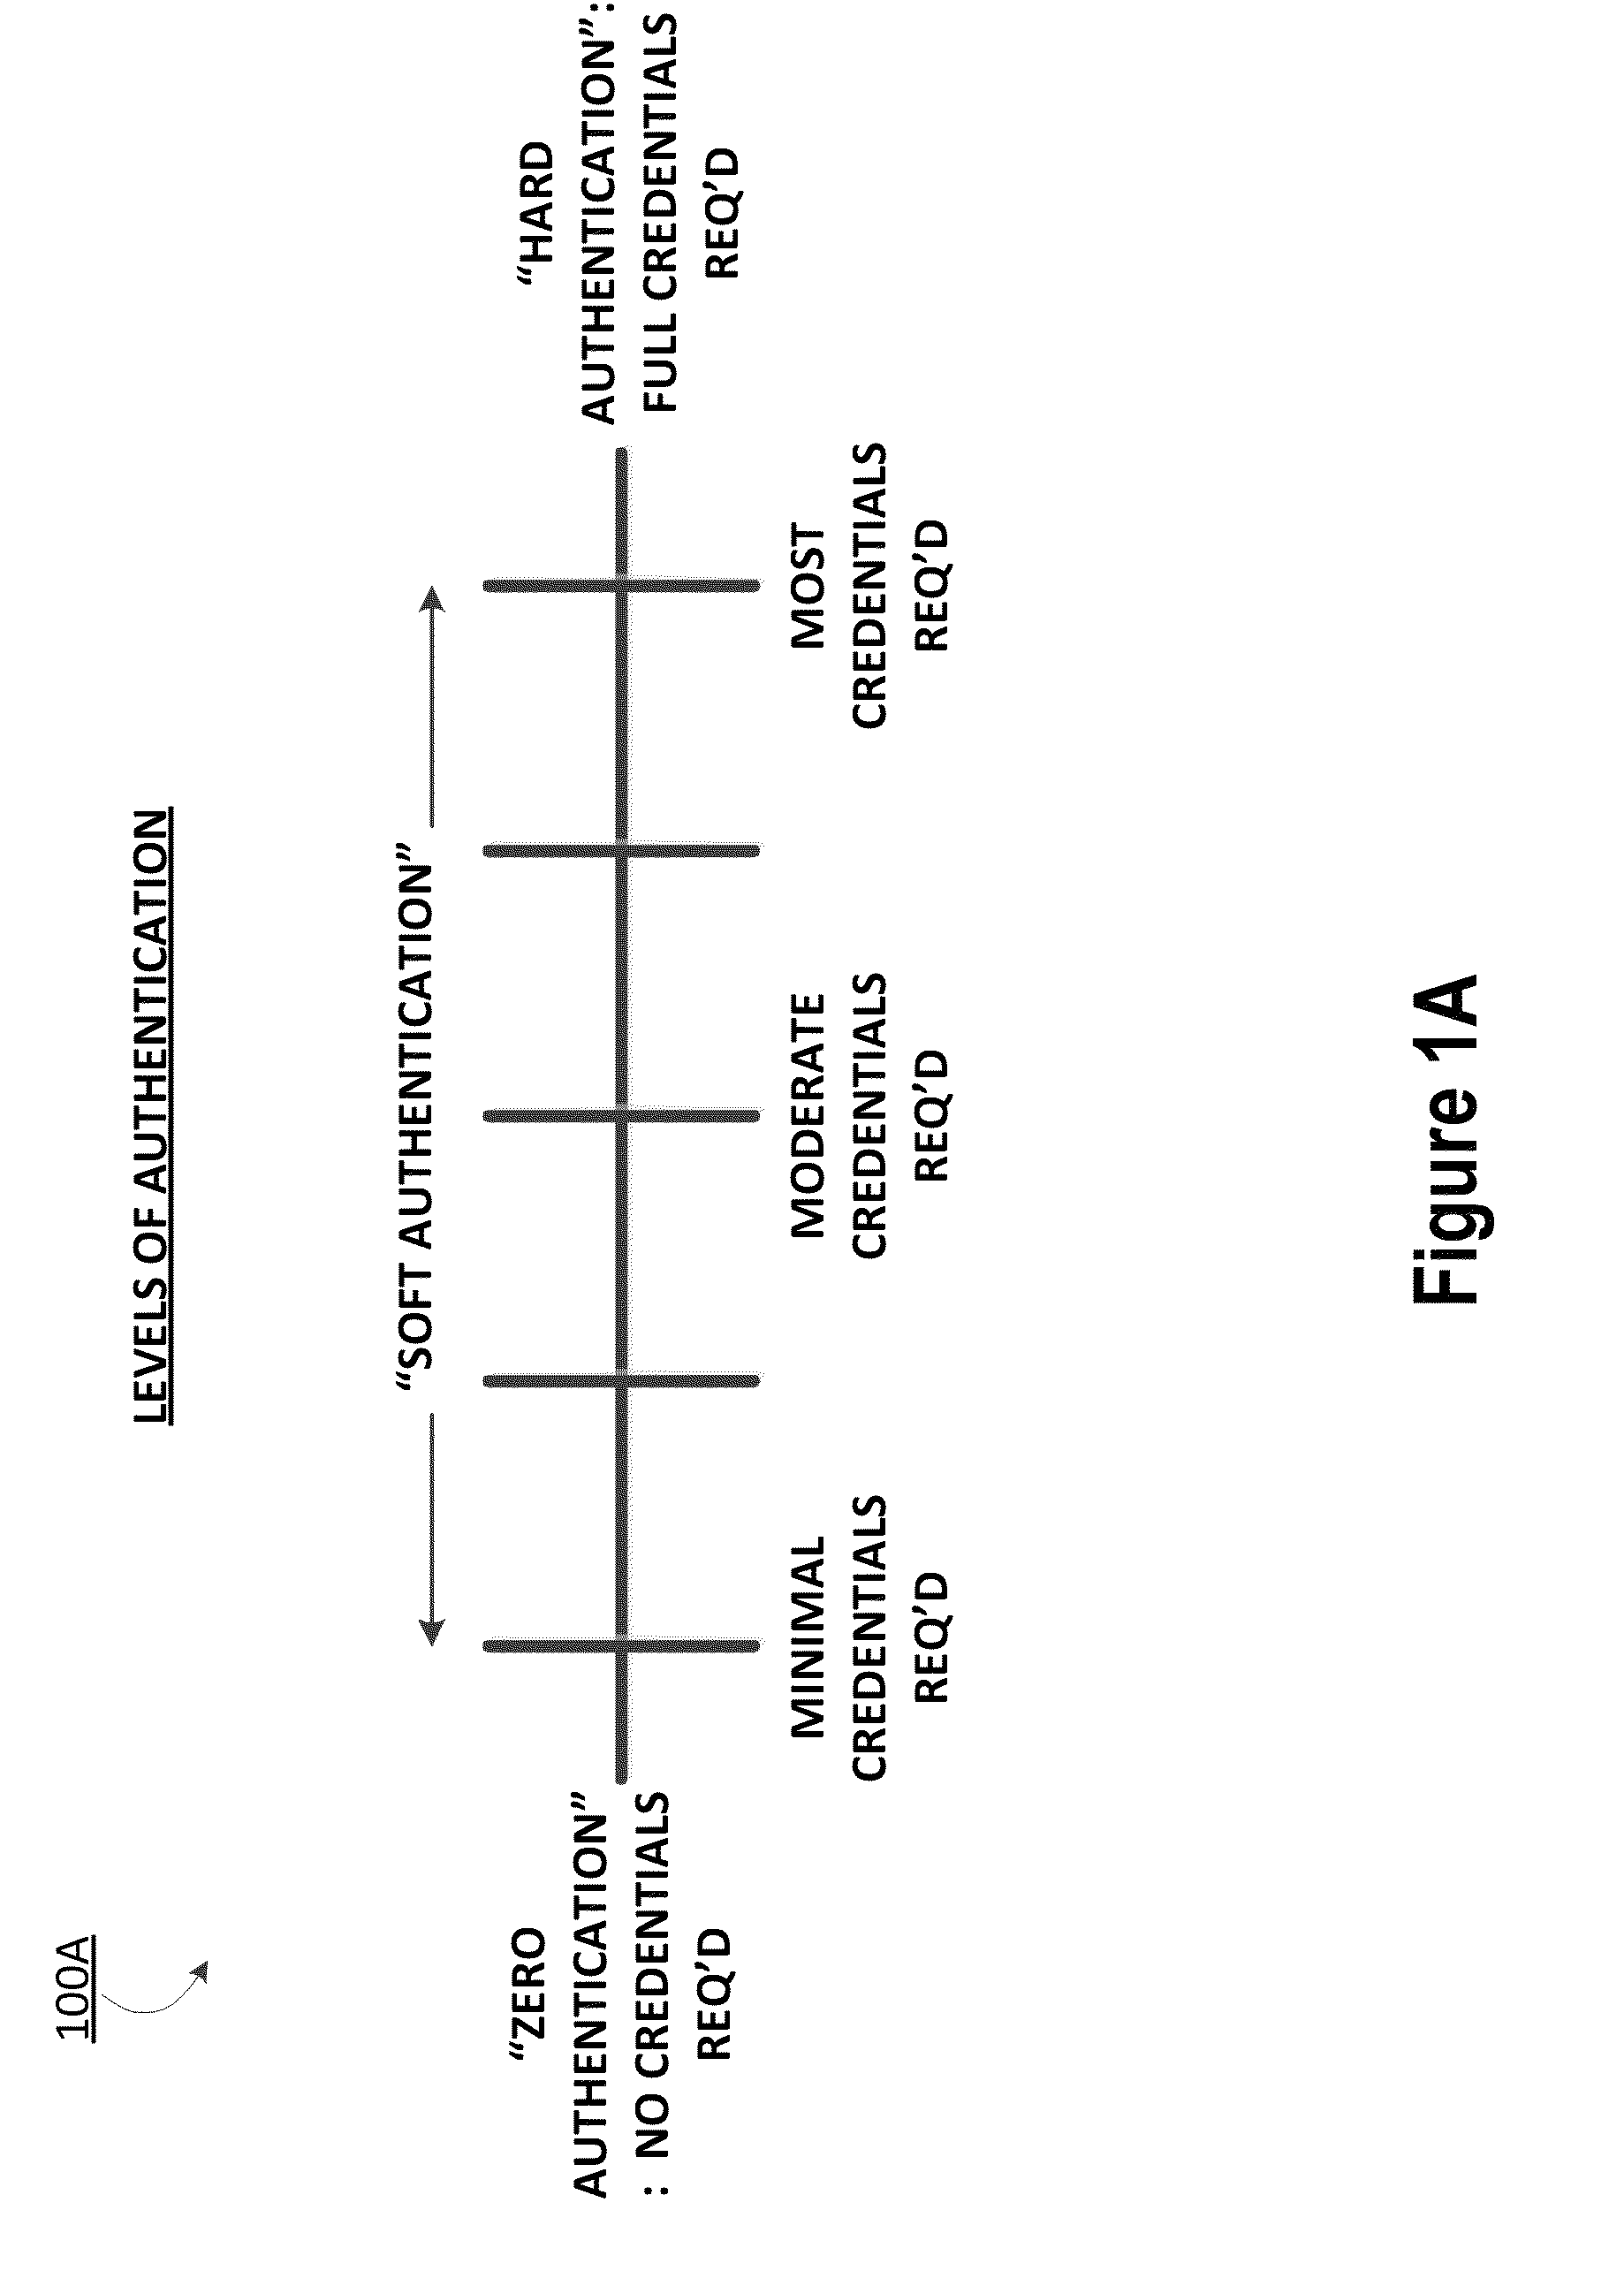 Providing authentication using previously-validated authentication credentials